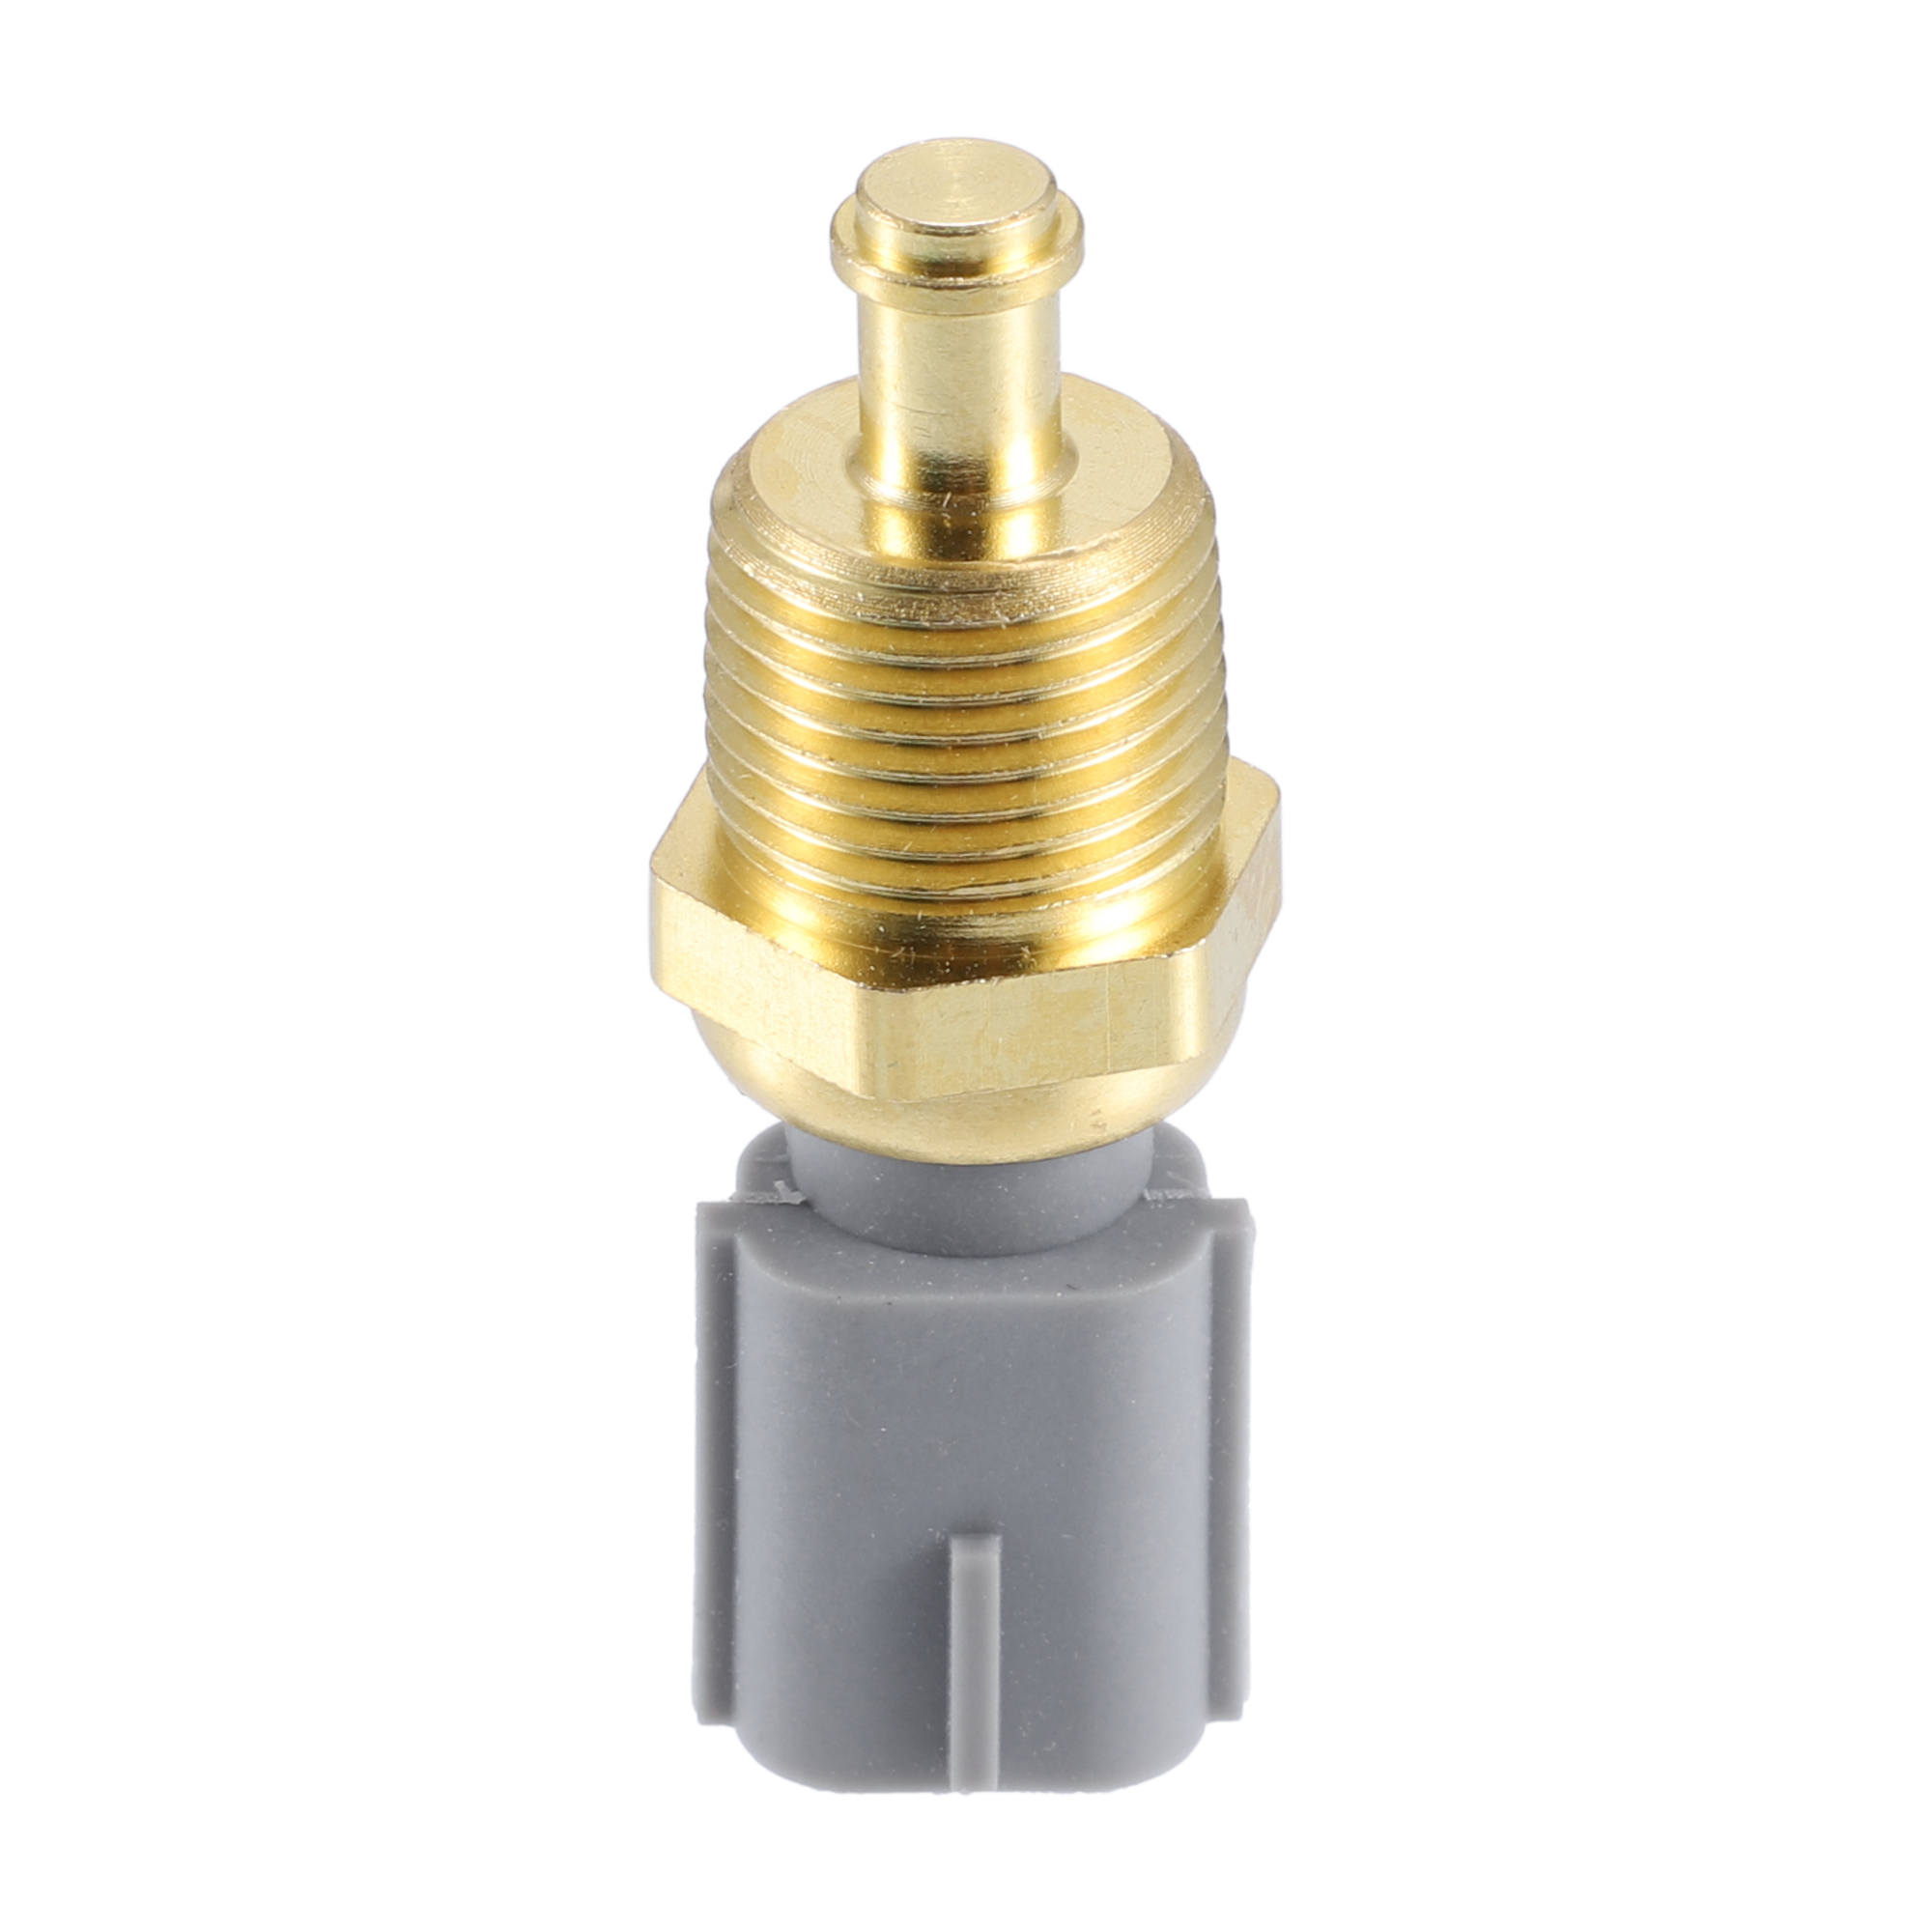 3F1Z12A648A Engine Coolant Temperature Sensor Temp Sender for Ford for Mustang - image 1 of 6